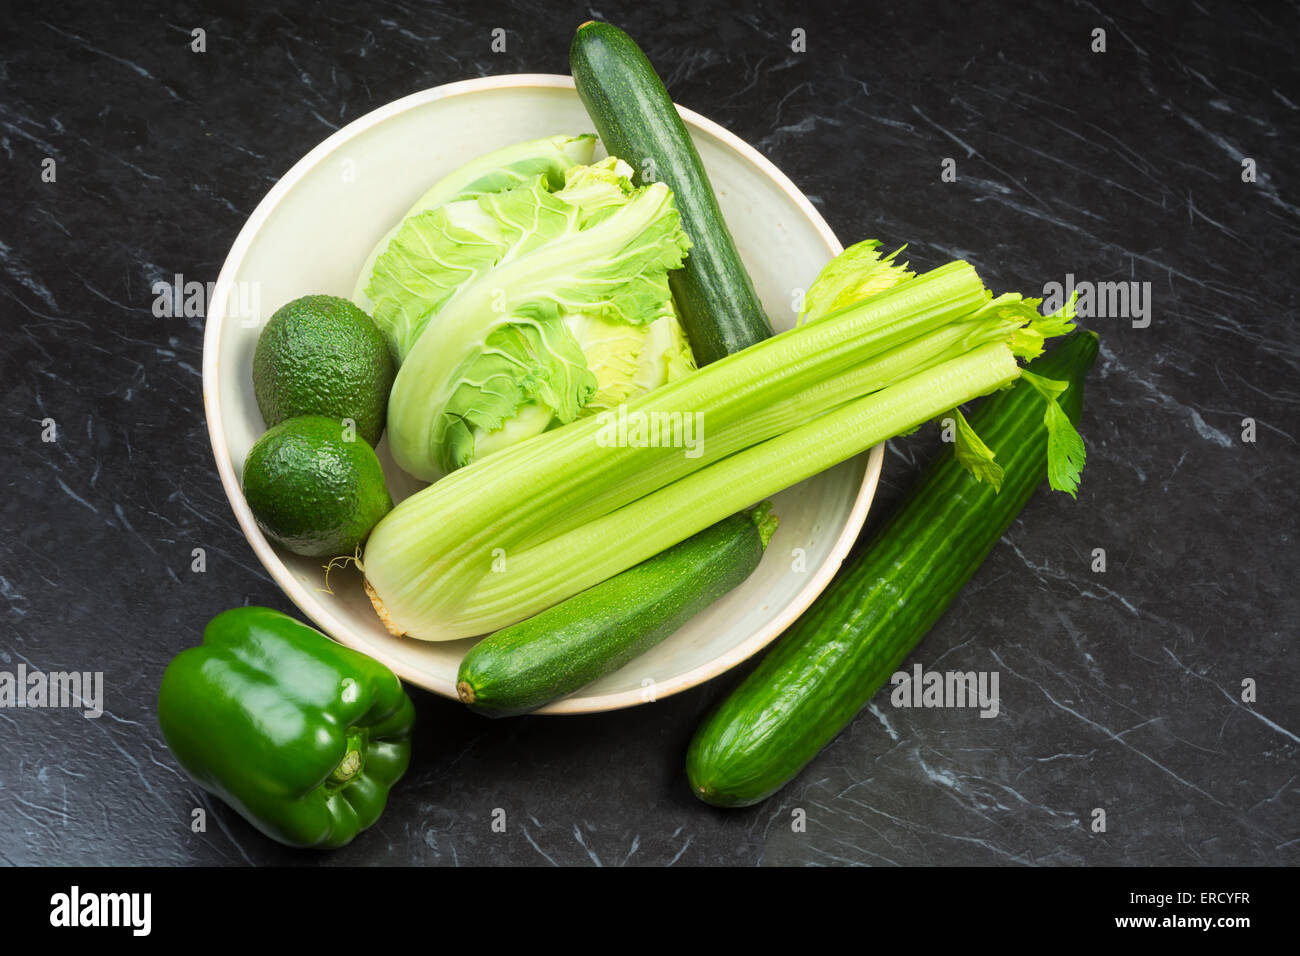 Assorted fresh green vegetables in a ceramic bowl on a black stone surface Stock Photo